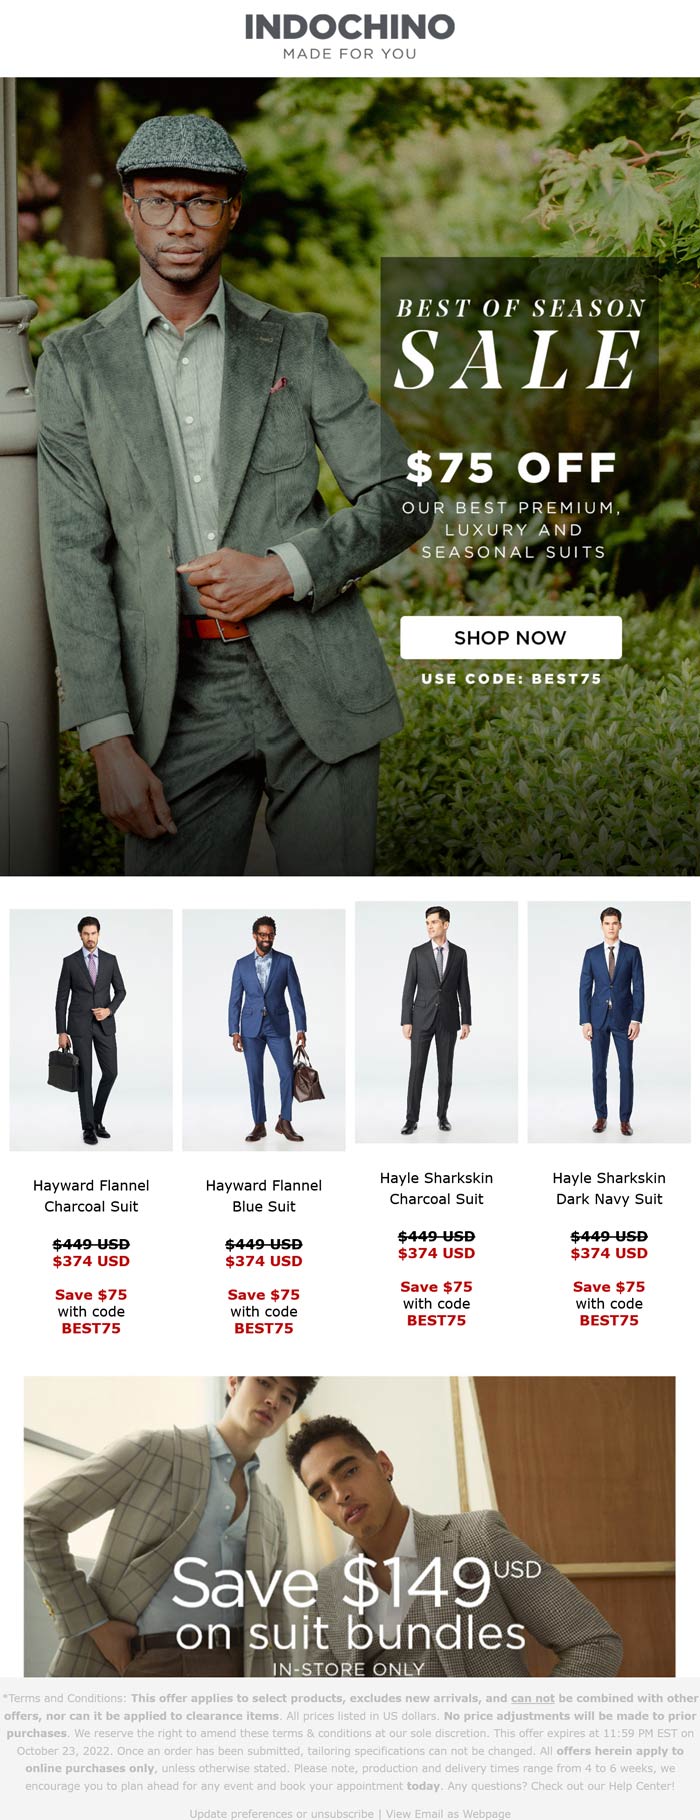 Indochino stores Coupon  $75 off suits at Indochino via promo code BEST75 #indochino 